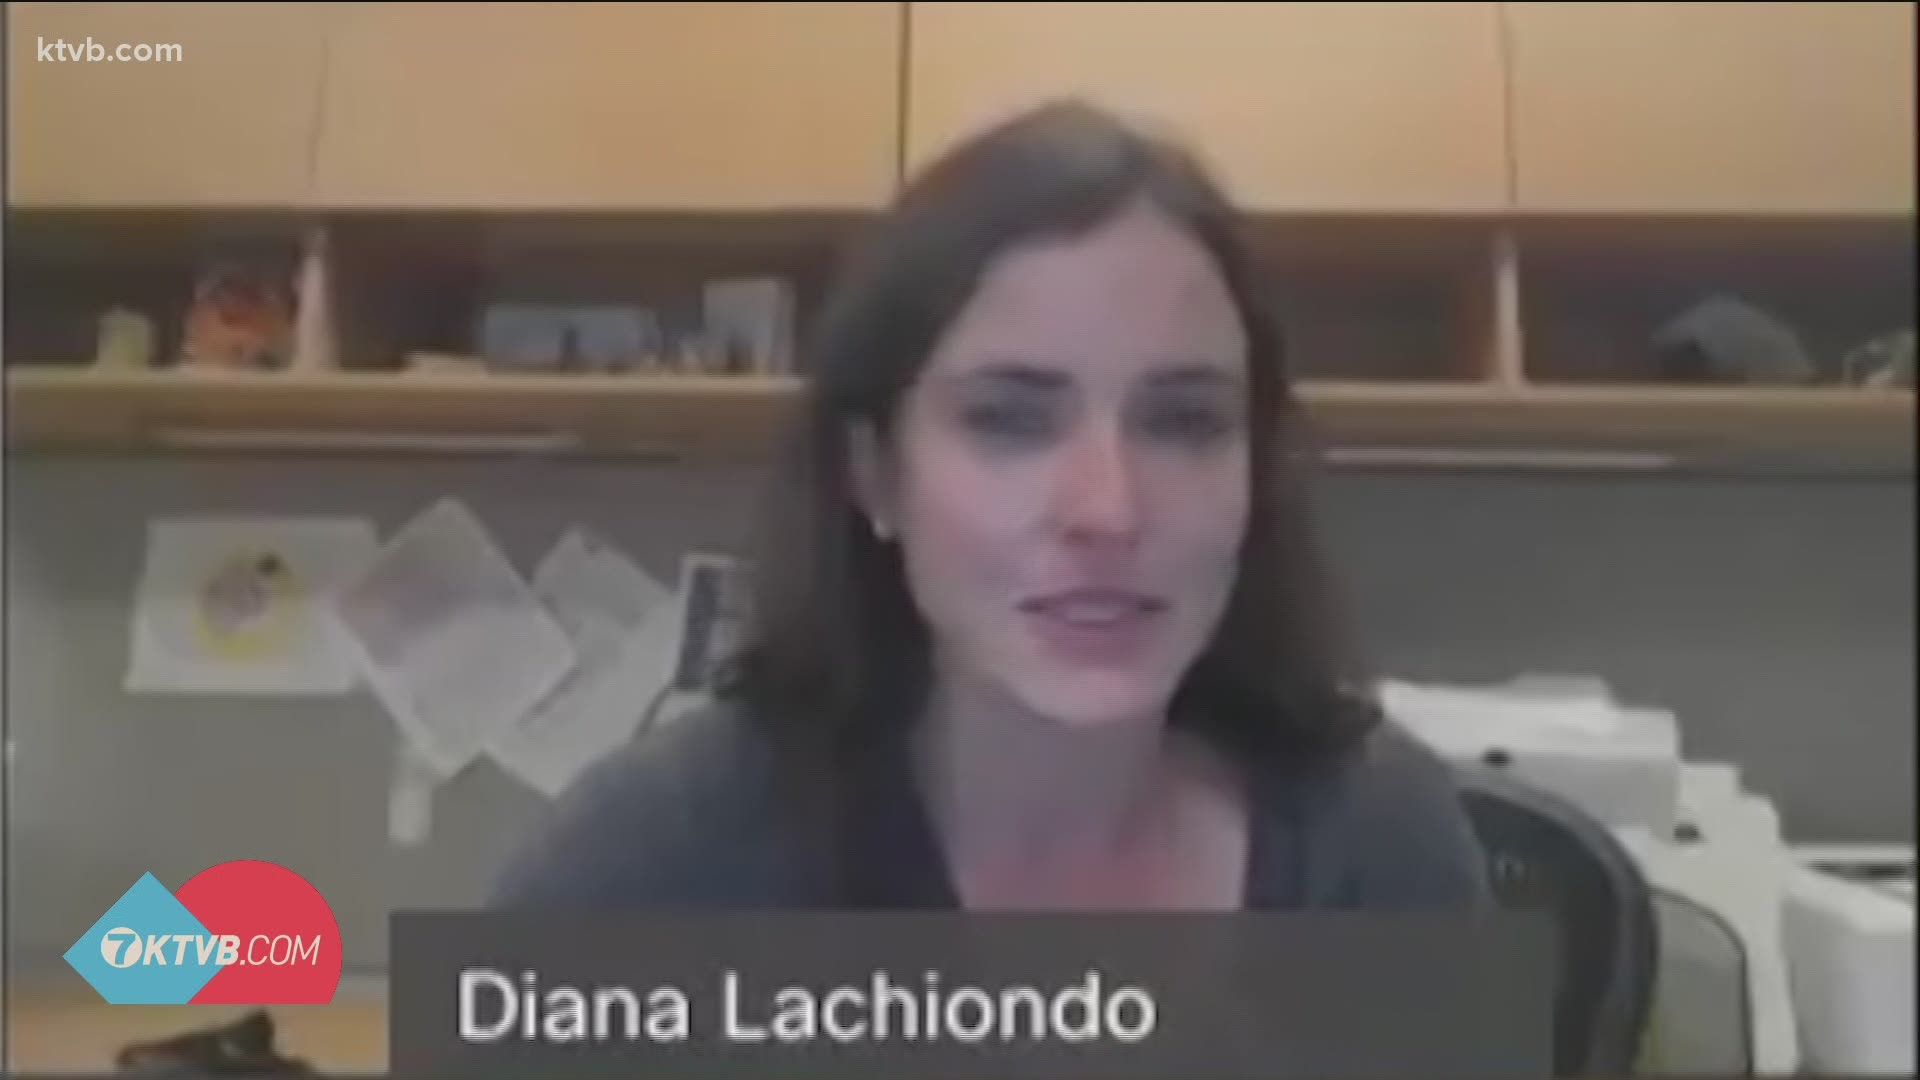 "I am sad. I am tired. I fear that, in my choosing to hold public office, my family has too-often paid the price," Diana Lachiando told KTVB on Wednesday.